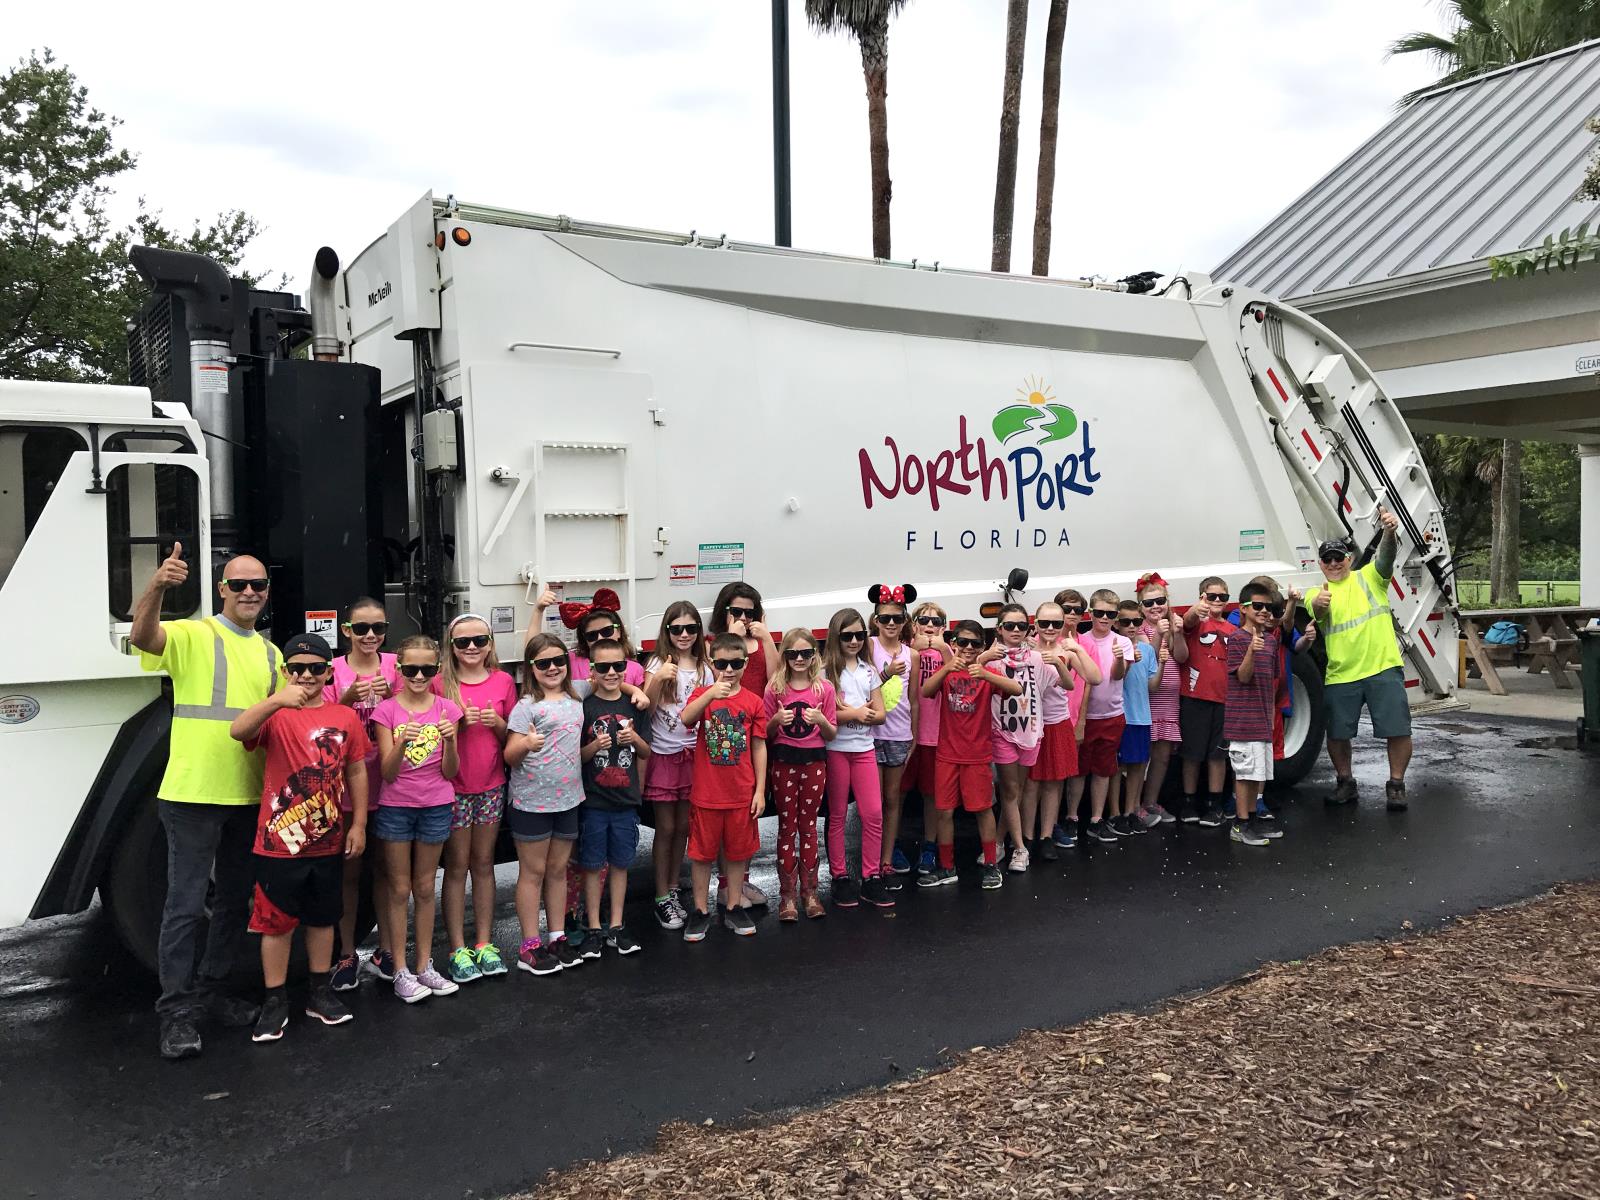 Children standing by a waste collection truck